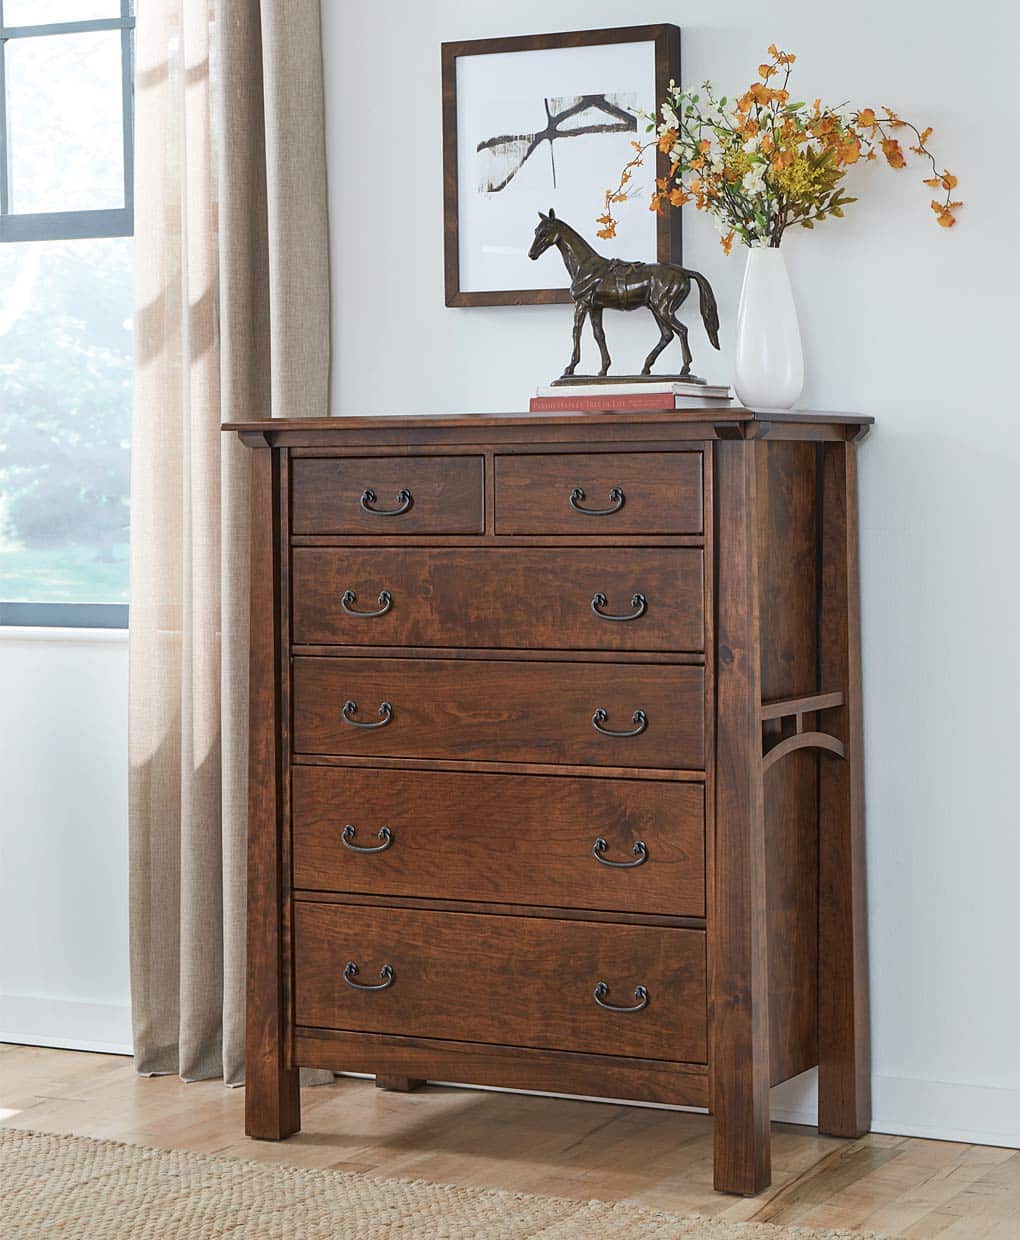 Artesa 6 Drawer Chest [JRA-040, Rustic Cherry with a Michael's Cherry stain, Amish Direct Furniture]